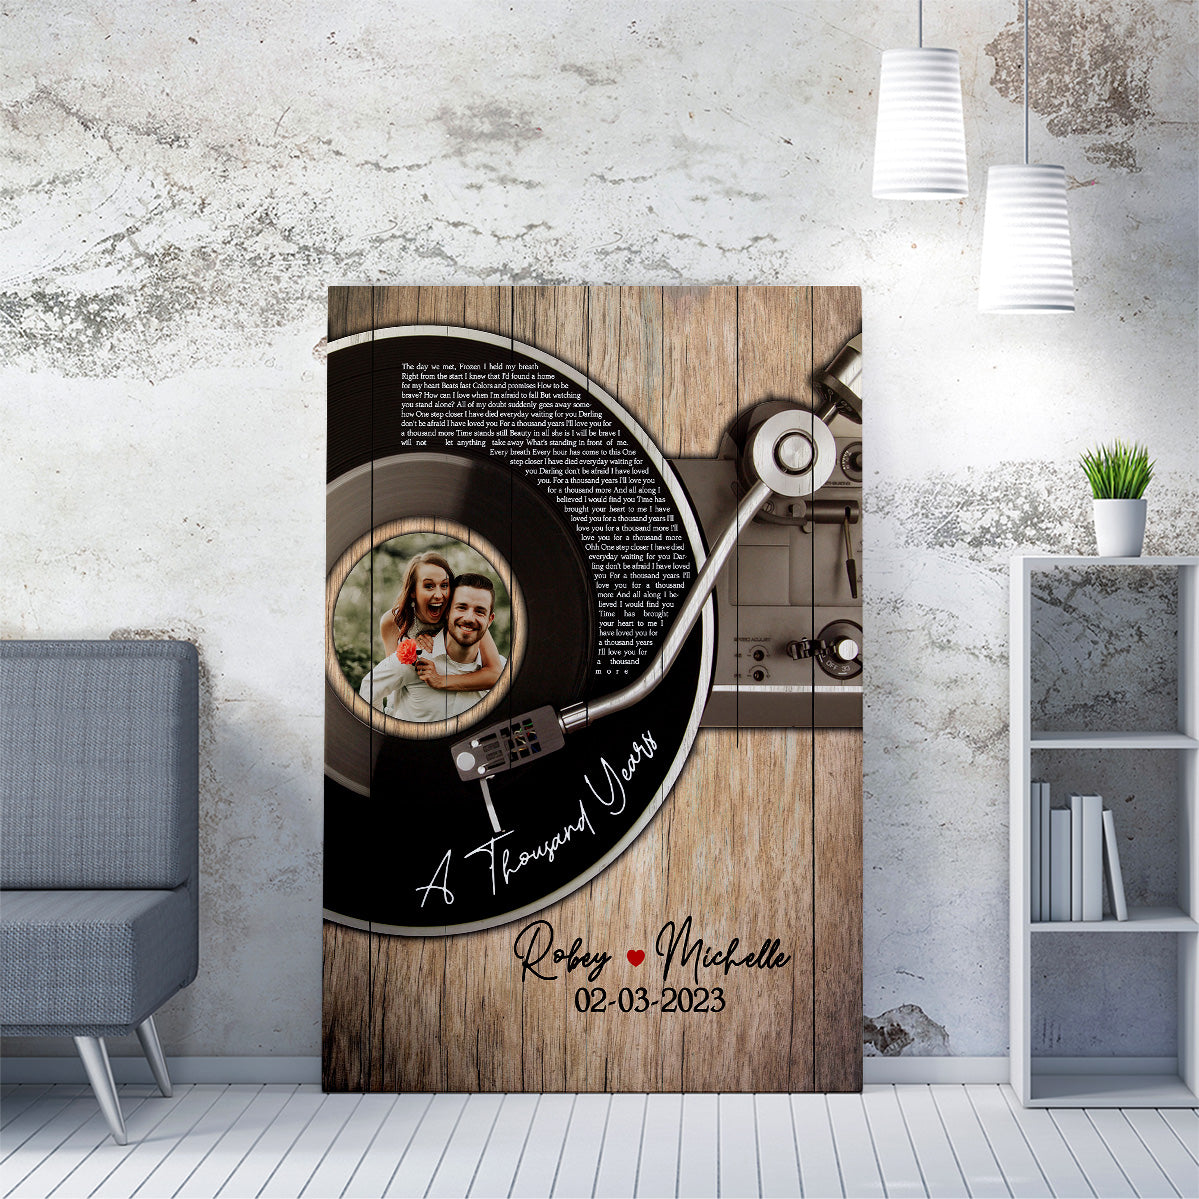 Vinyl Record Custom Song Lyrics Photo Wedding Anniversary Gift Our First Dance Canvas, Gift for Husband Wife Couple